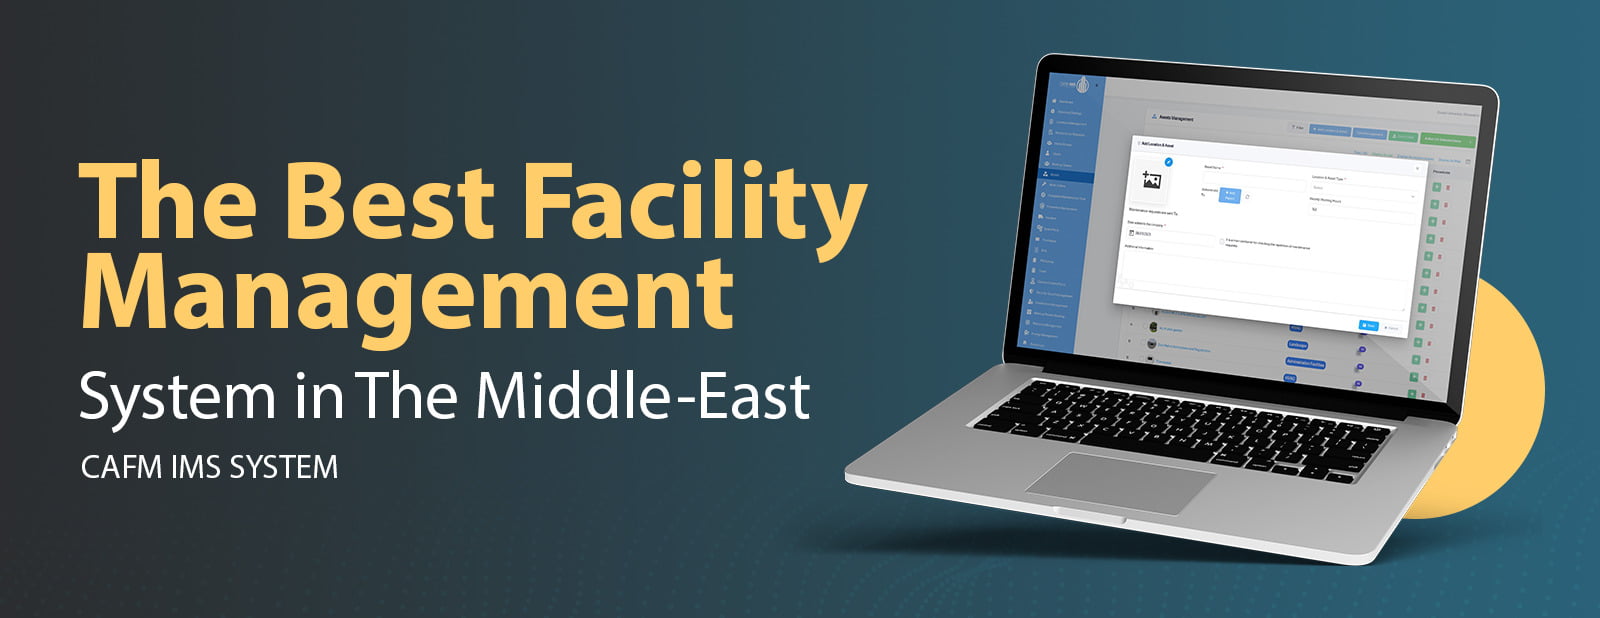 The Best Facility Management System in The Middle-East